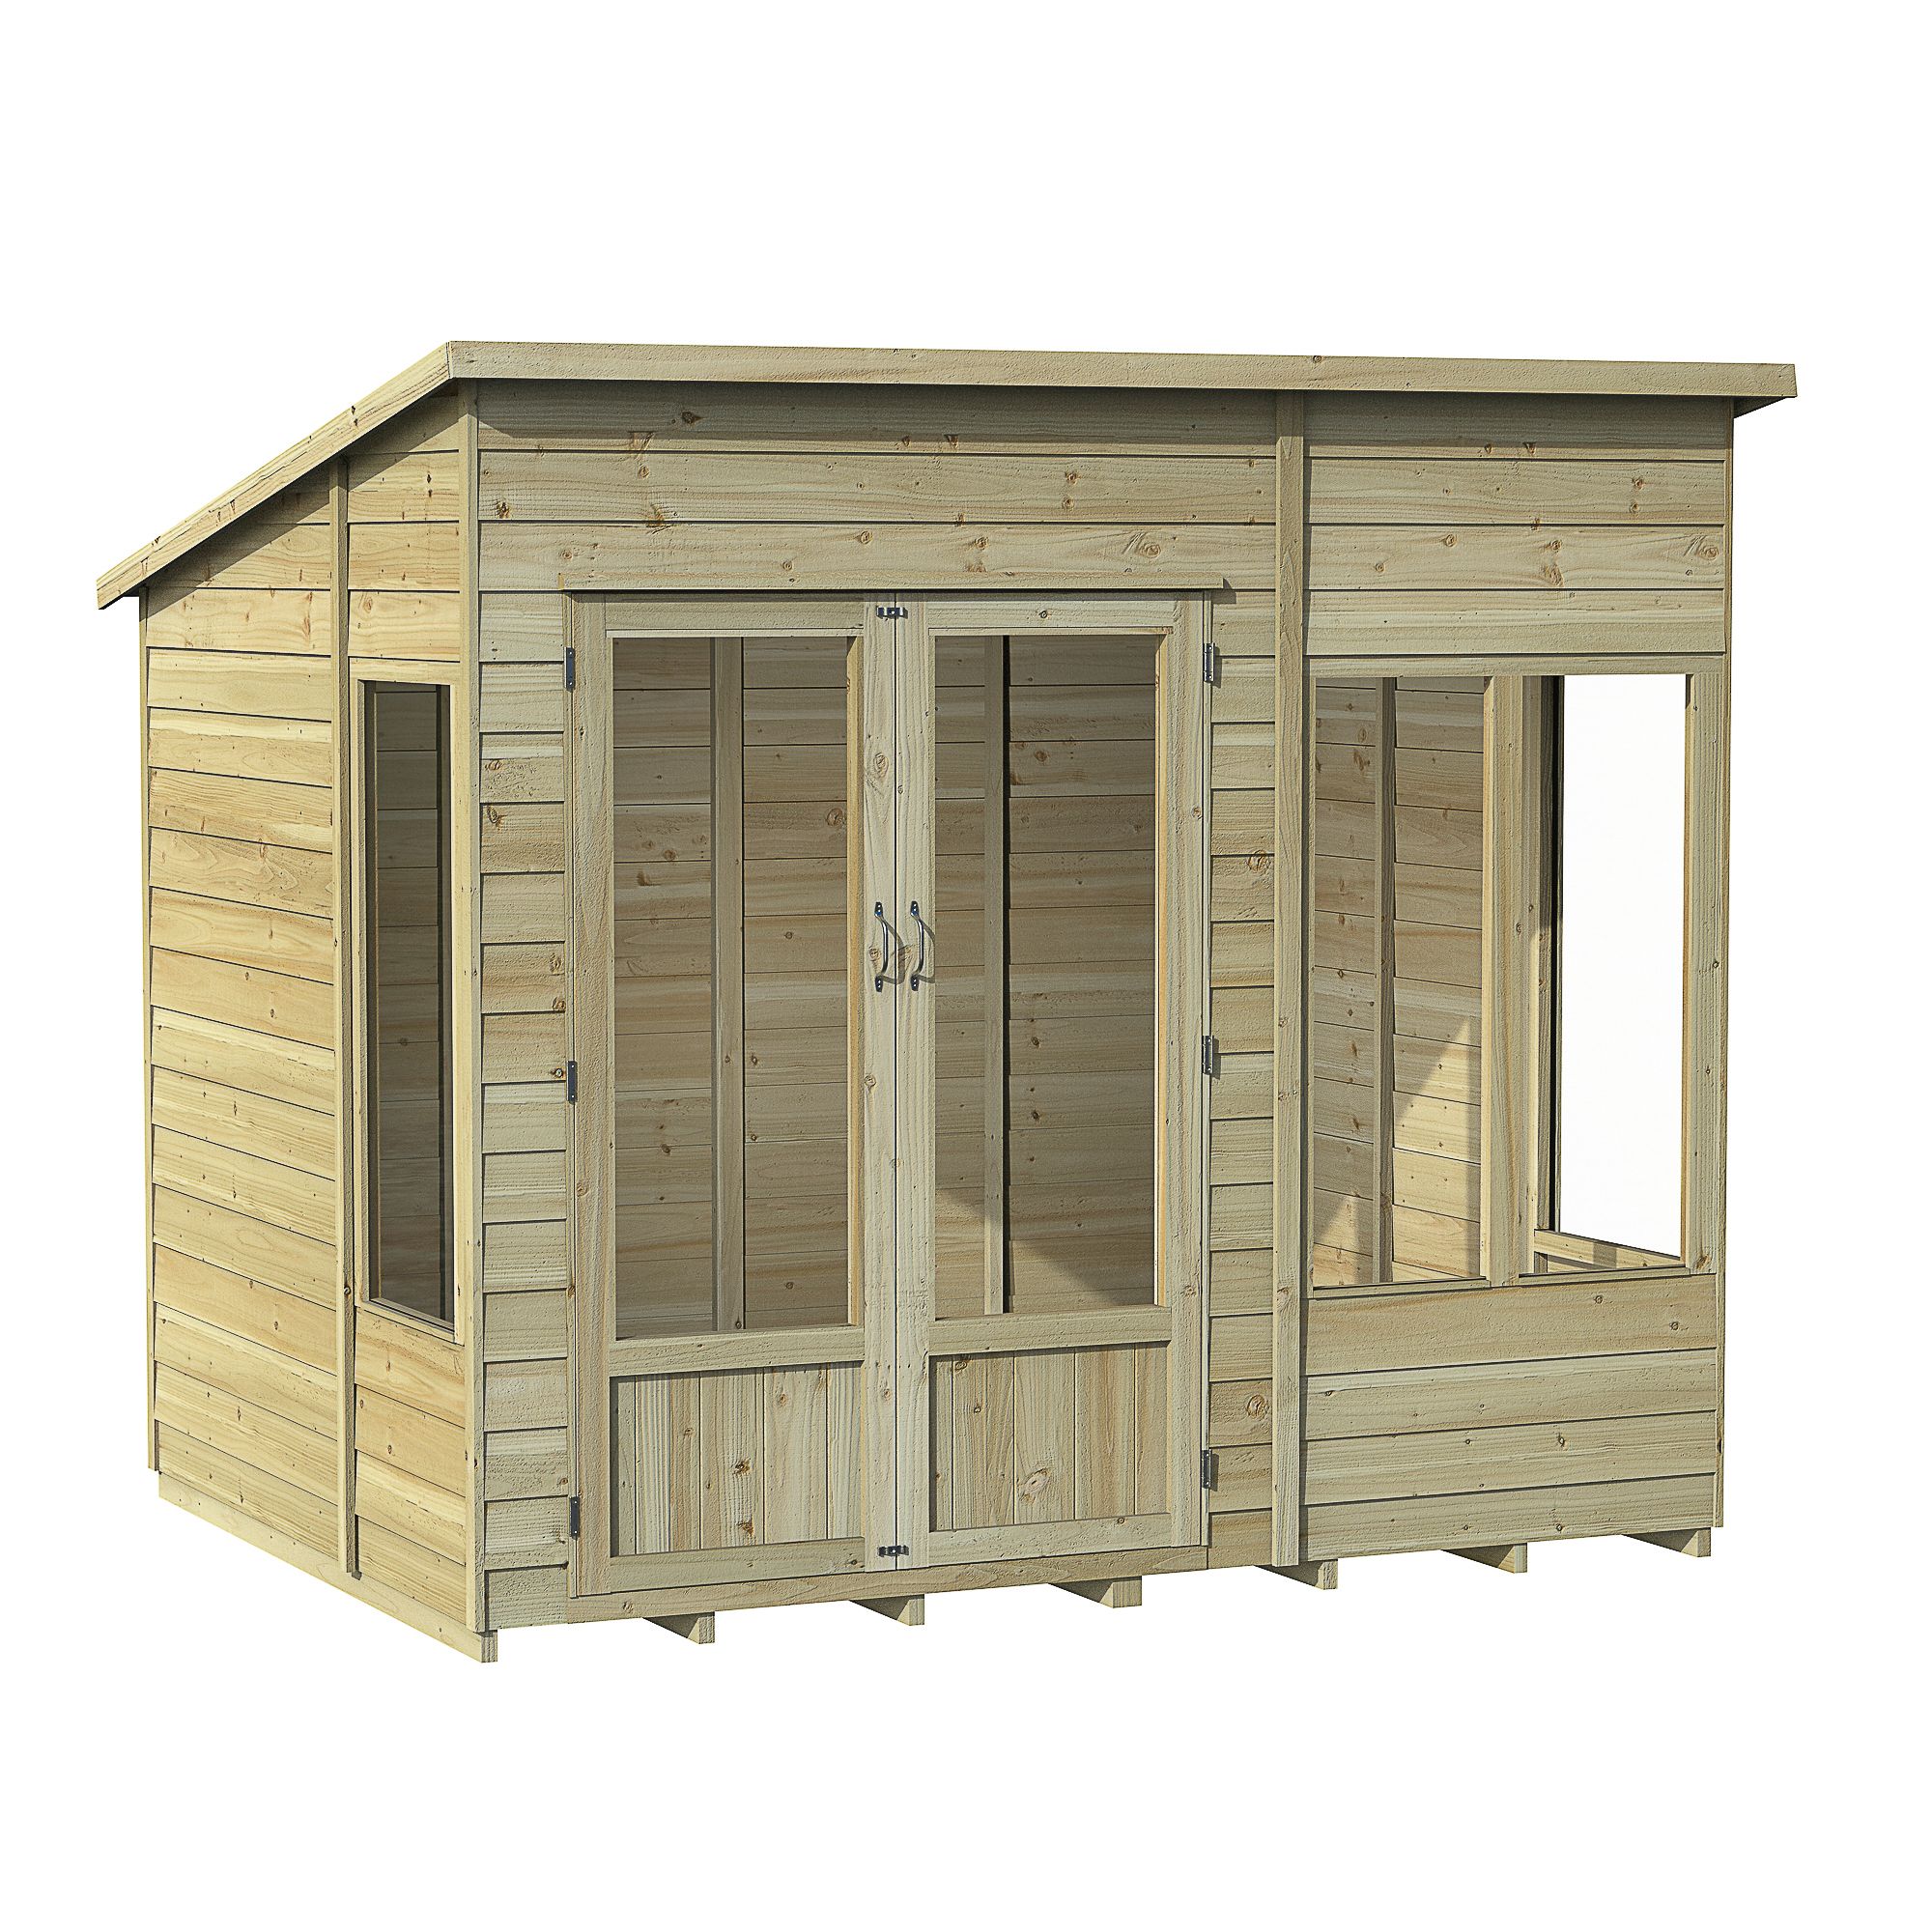 Forest Garden Oakley 8x6 ft with Double door & 4 windows Pent Solid wood Summer house (Base included)